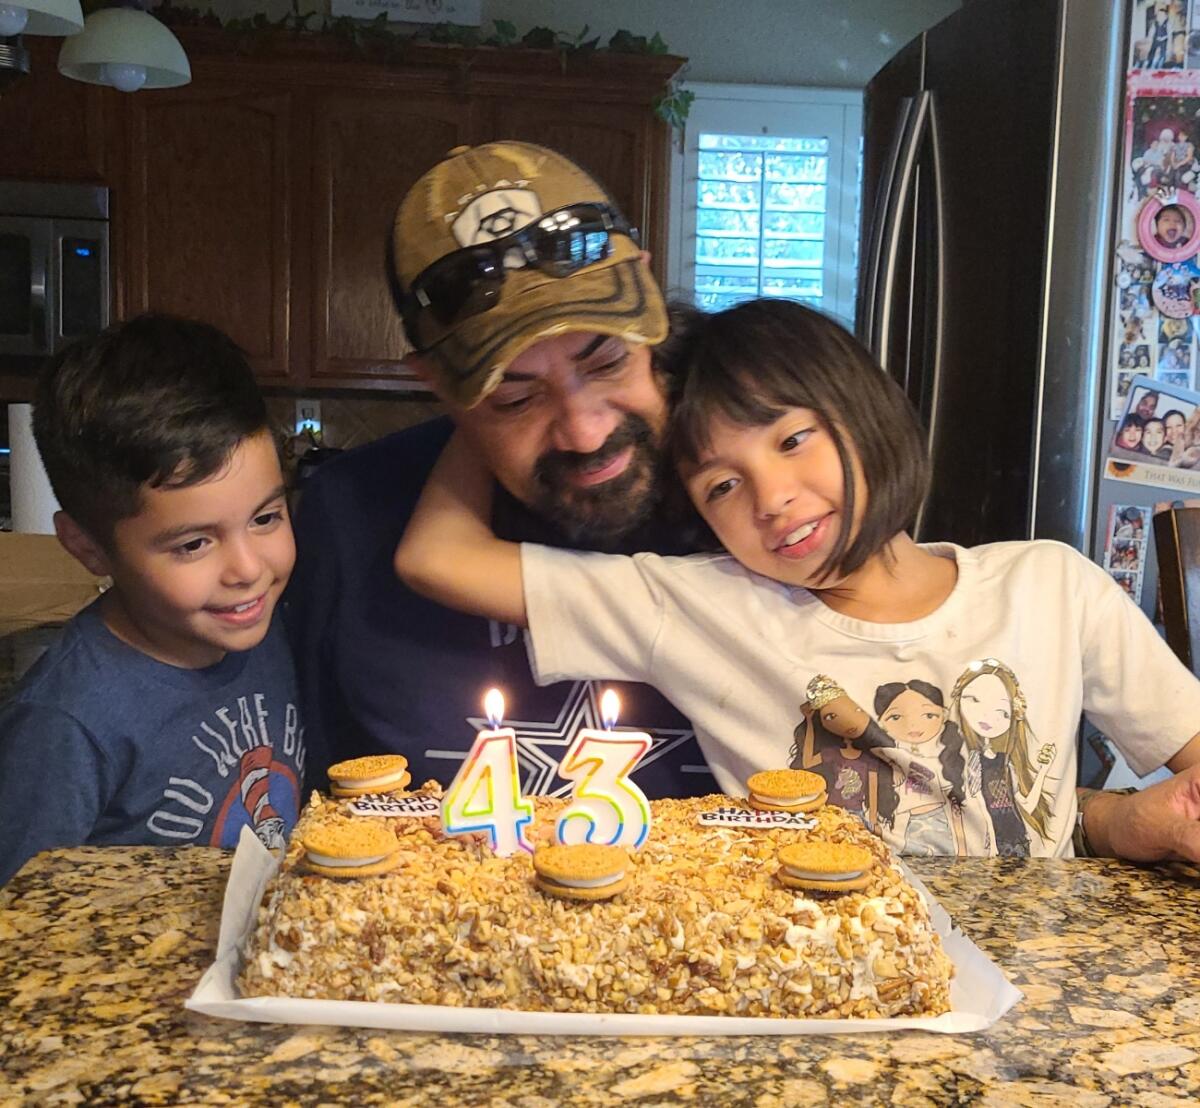 A man with two children in front of a cake with "43" in candles